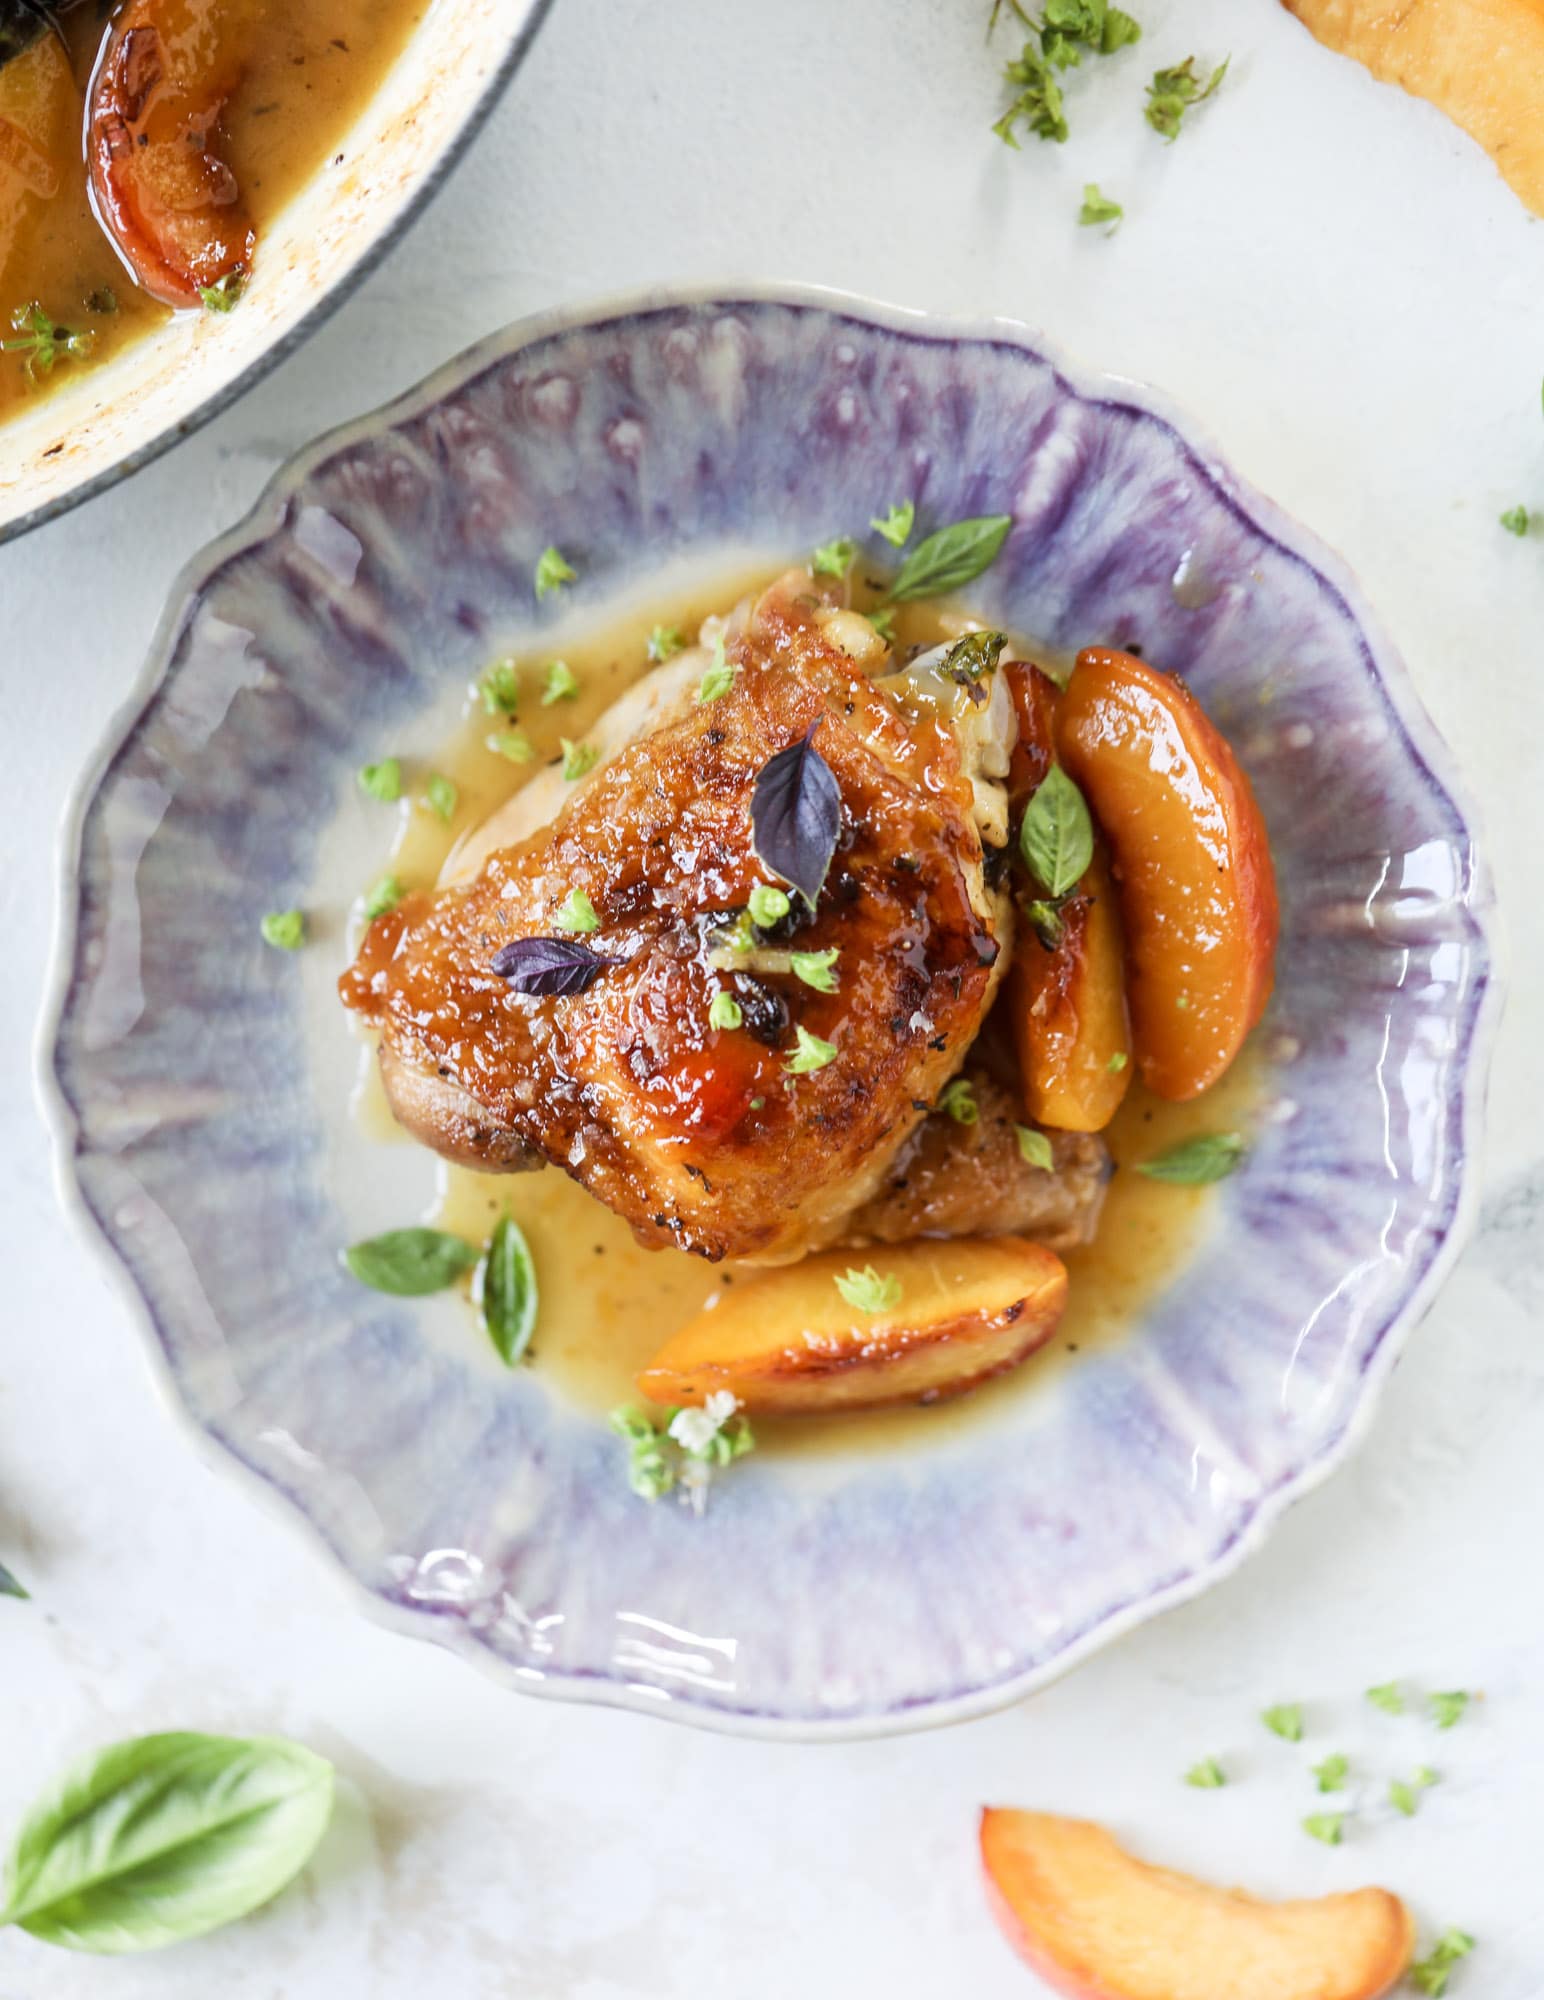 This amazing summertime one pot chicken is made with fresh peaches and basil and takes no time at all. The sweet and savory combination is perfect for a quick weeknight meal; the sauce is amazing for dipping and the chicken is flavorful as can be. I howsweeteats.com #chicken #peach #basil #easy #dinner #recipe #summer #healthy